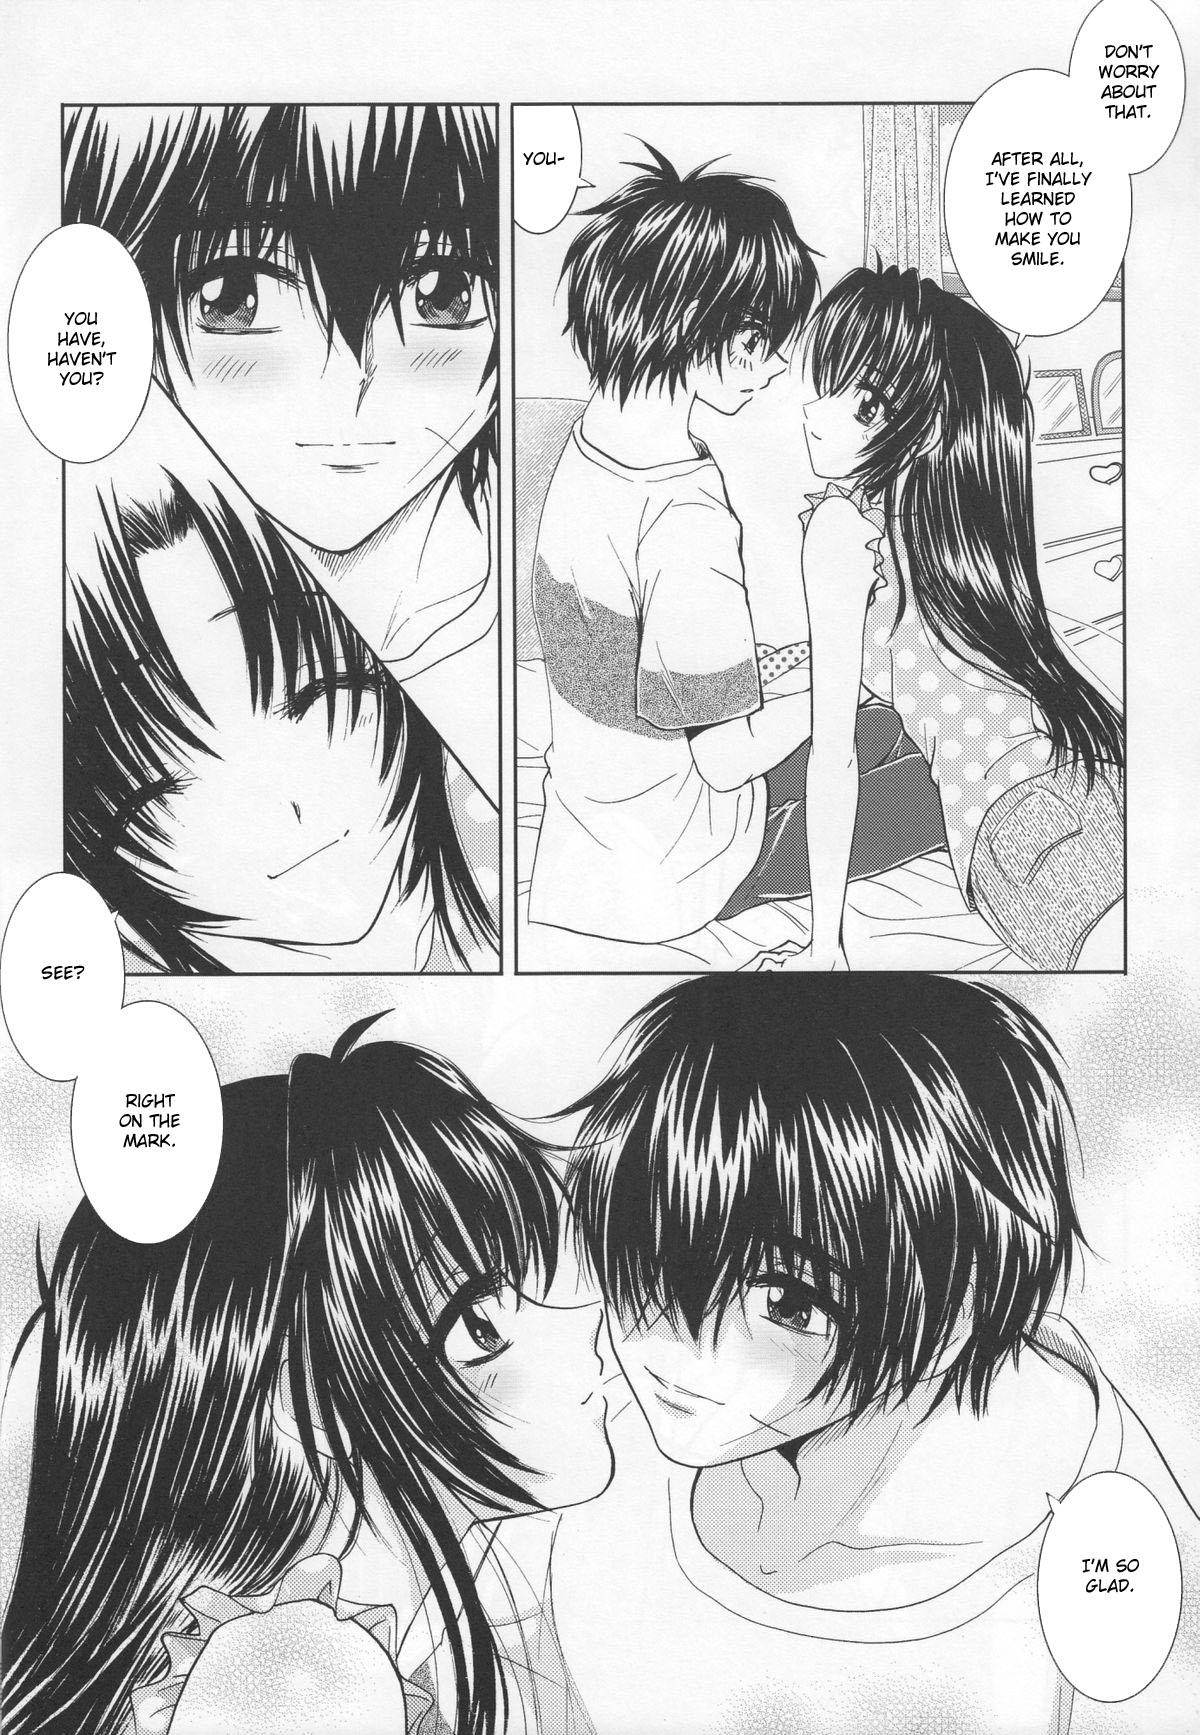 Hotel SEXY PANIC Yappari Sei ga Ichiban!? | Sexy Panic: Their First Time is Without Protection!? - Full metal panic Missionary - Page 7